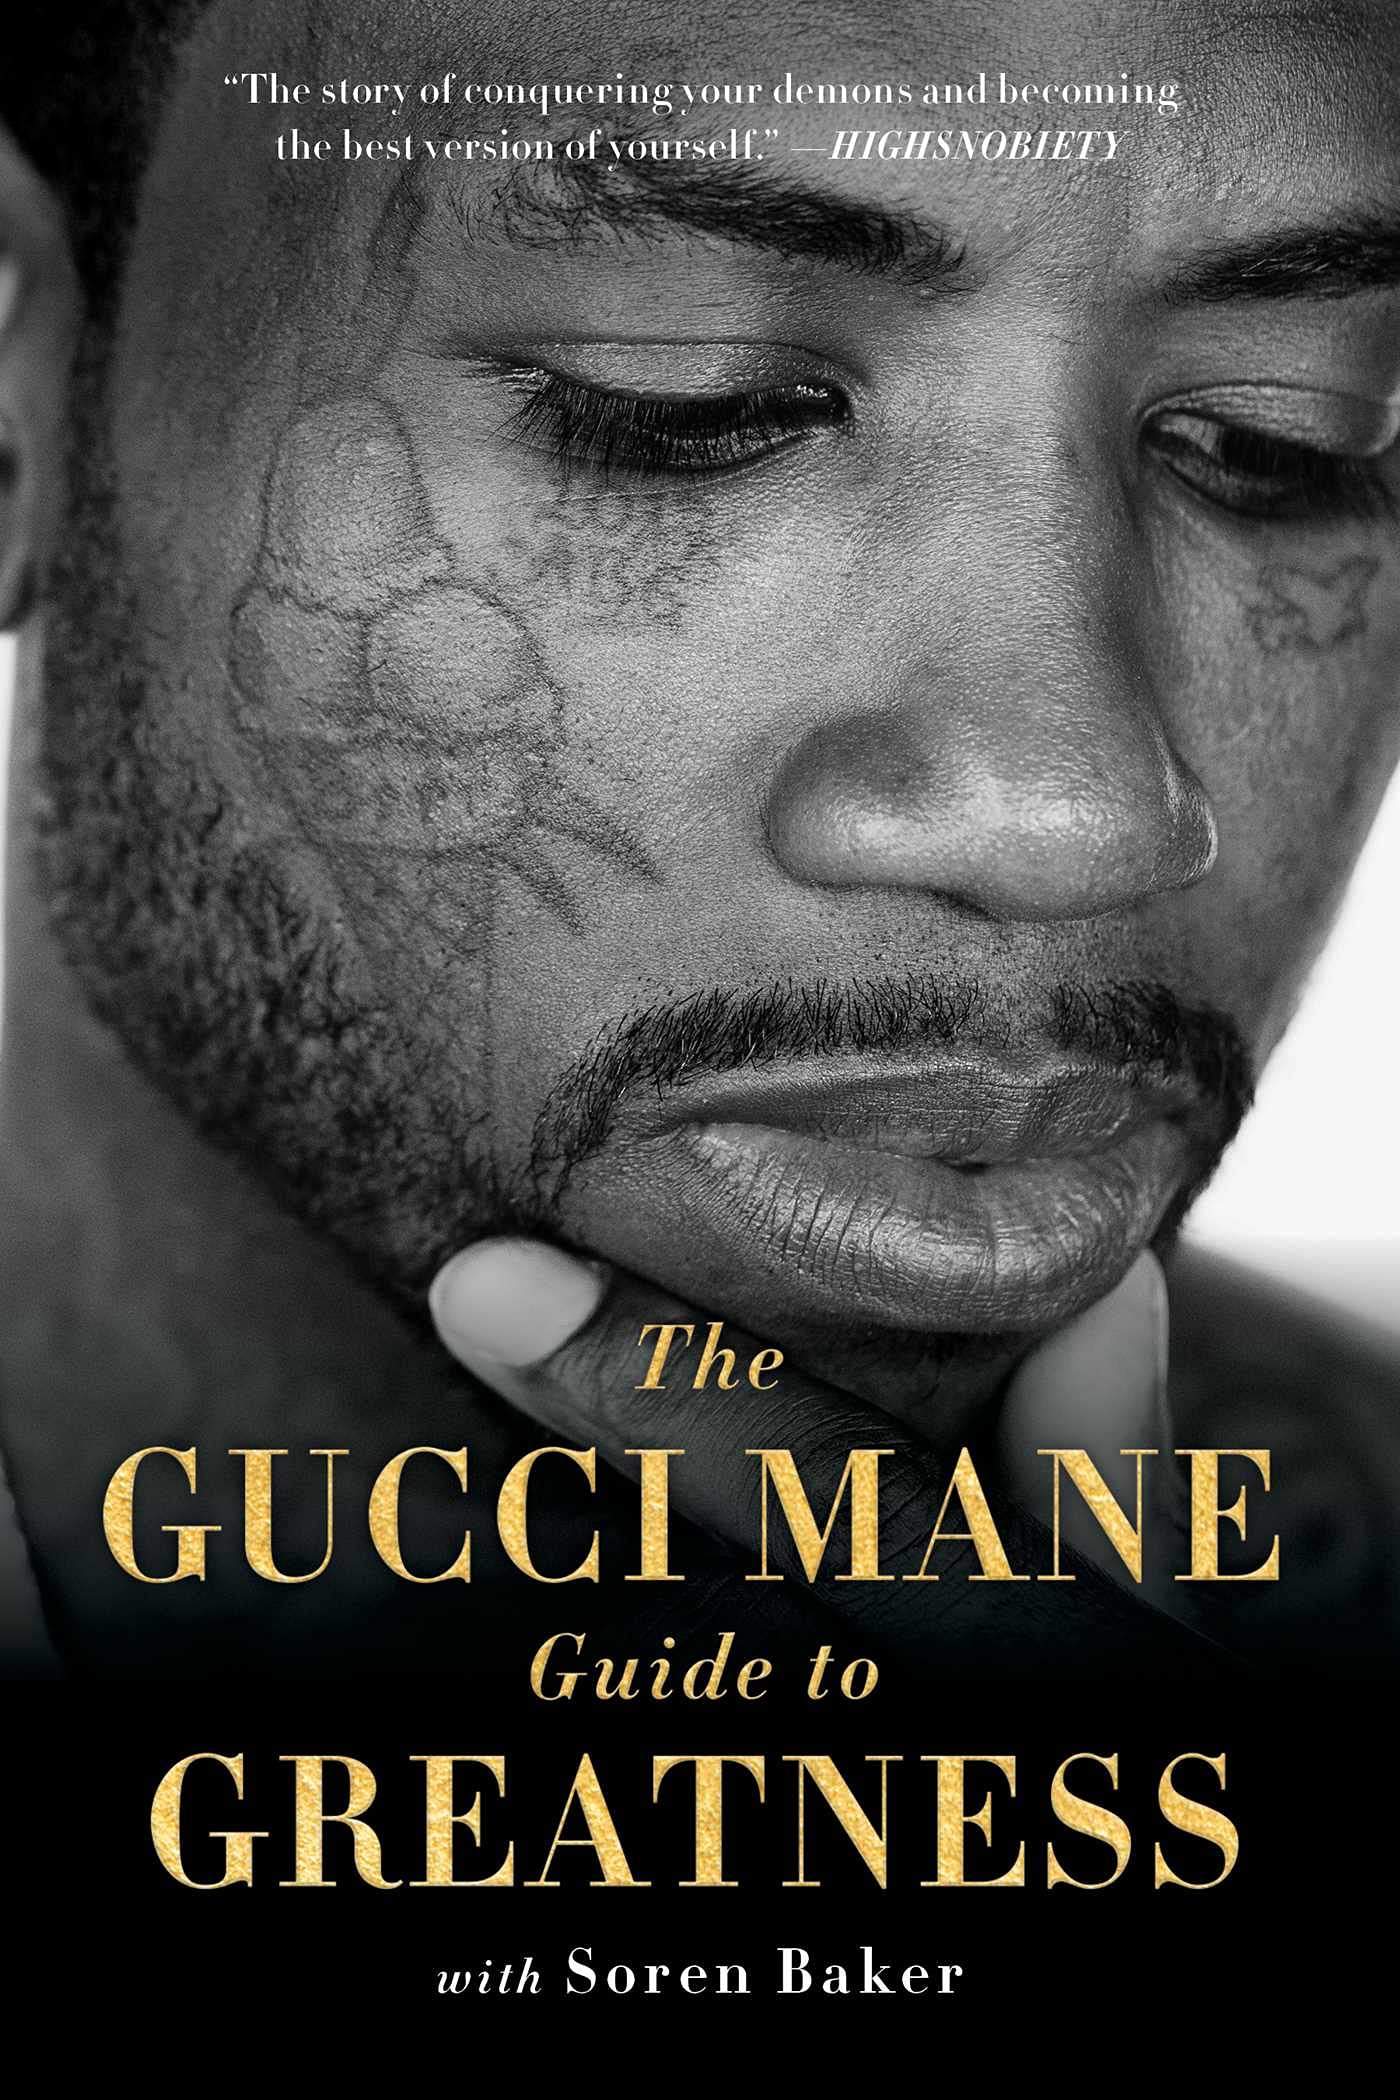 The Gucci Mane Guide to Greatness - SureShot Books Publishing LLC